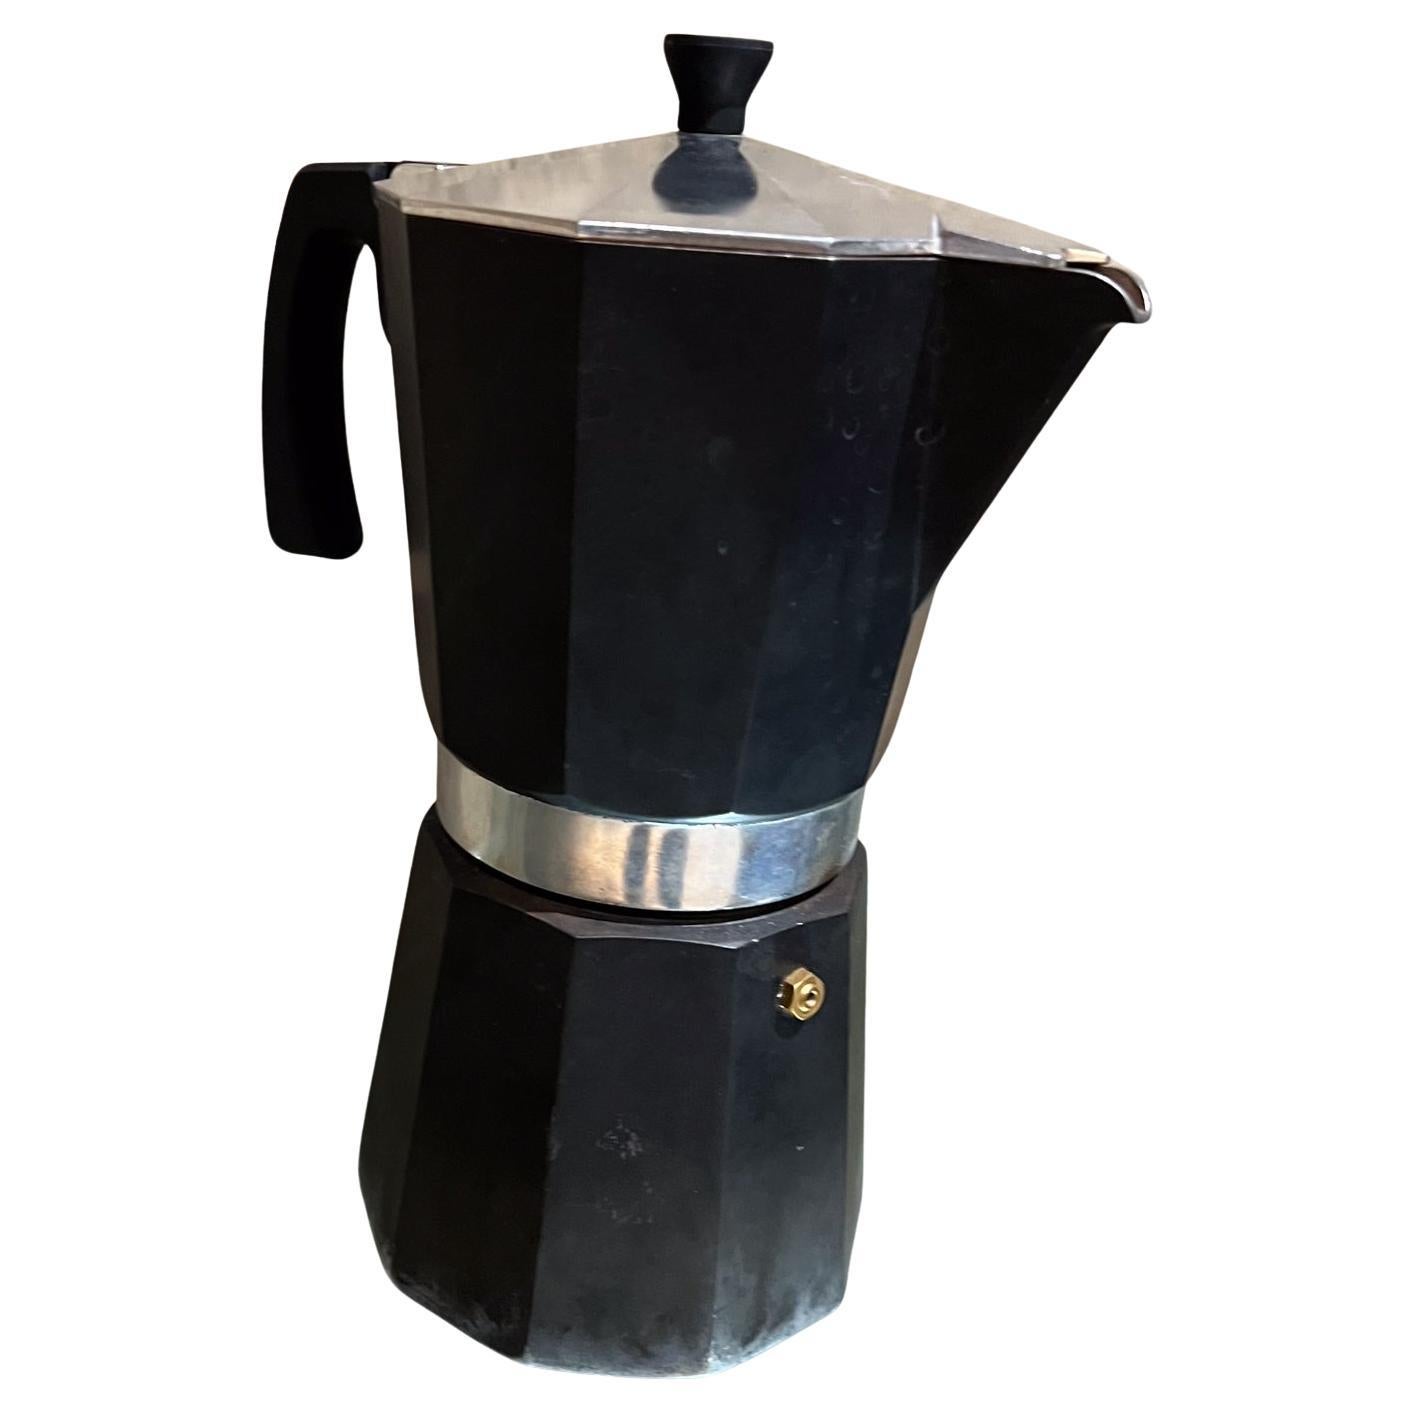 Large Stovetop Milano Espresso Coffee Maker Grosche Italy
10.75 h x 8.5 d x 5 w
Unrestored preowned vintage original condition not new condition.
See all images provided.